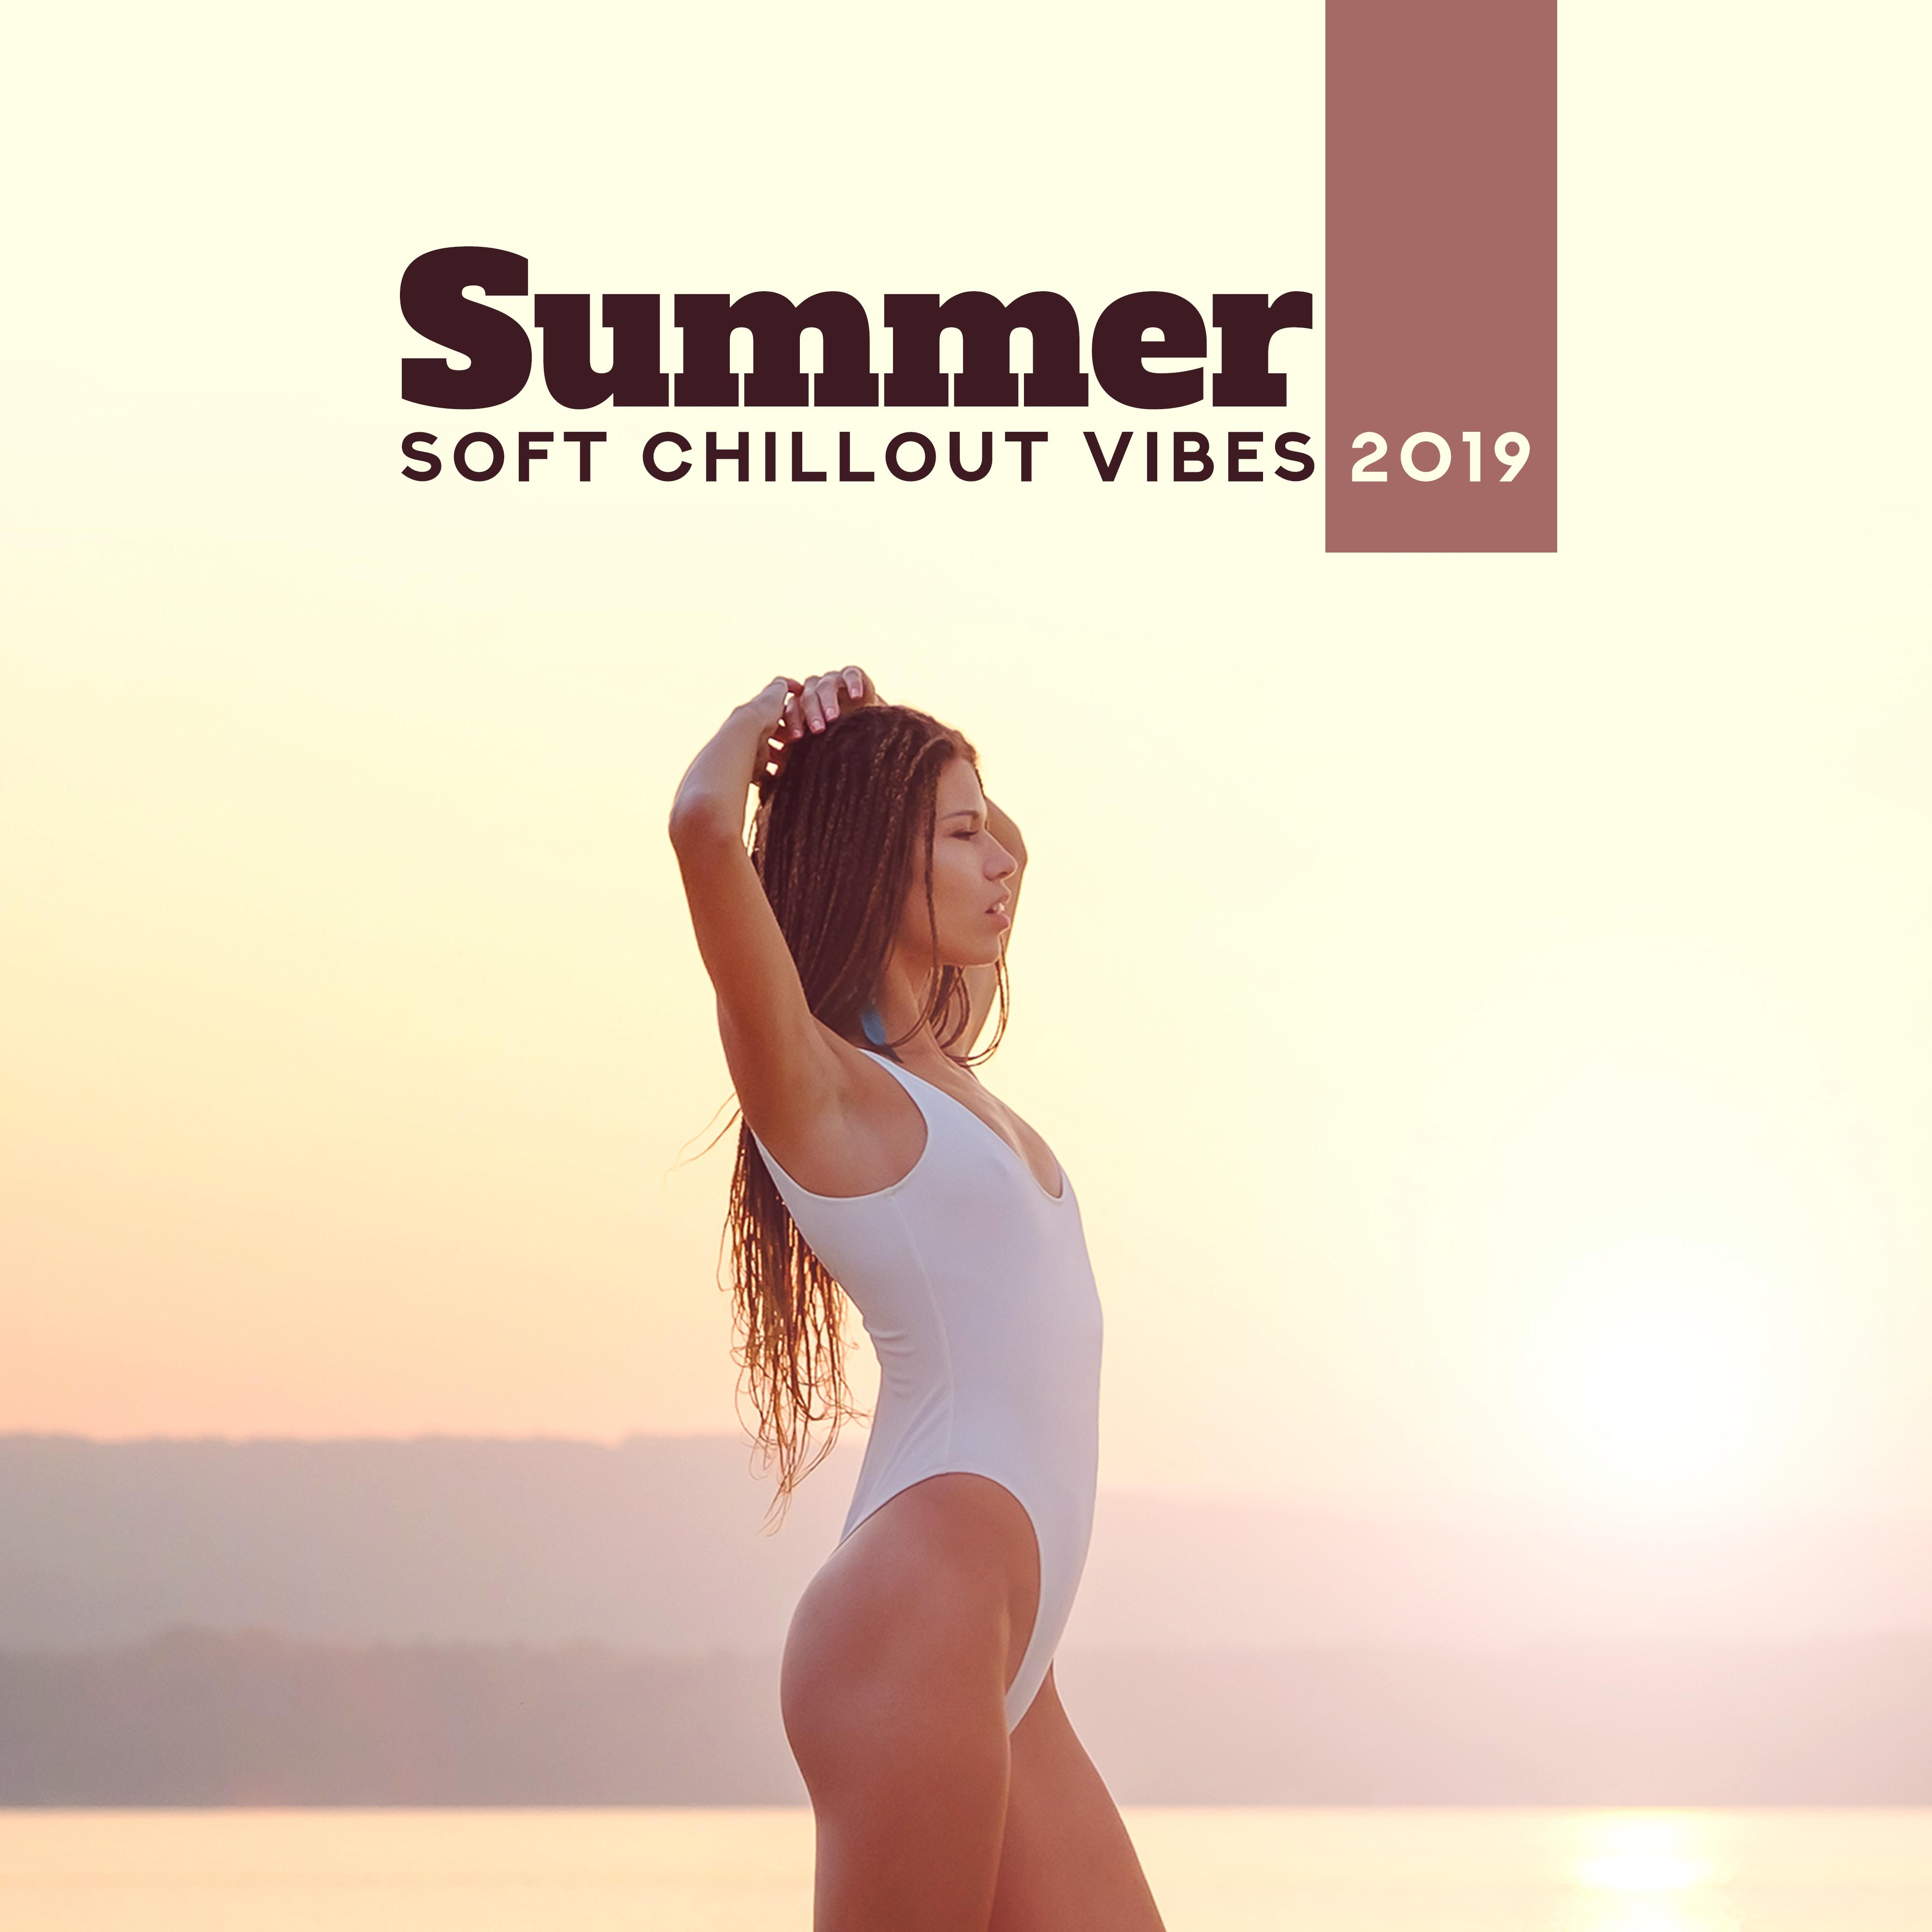 Summer Soft Chillout Vibes 2019 – 15 Relaxing Tracks, Poolside or Beach Calming, Hot Days Full of Sun